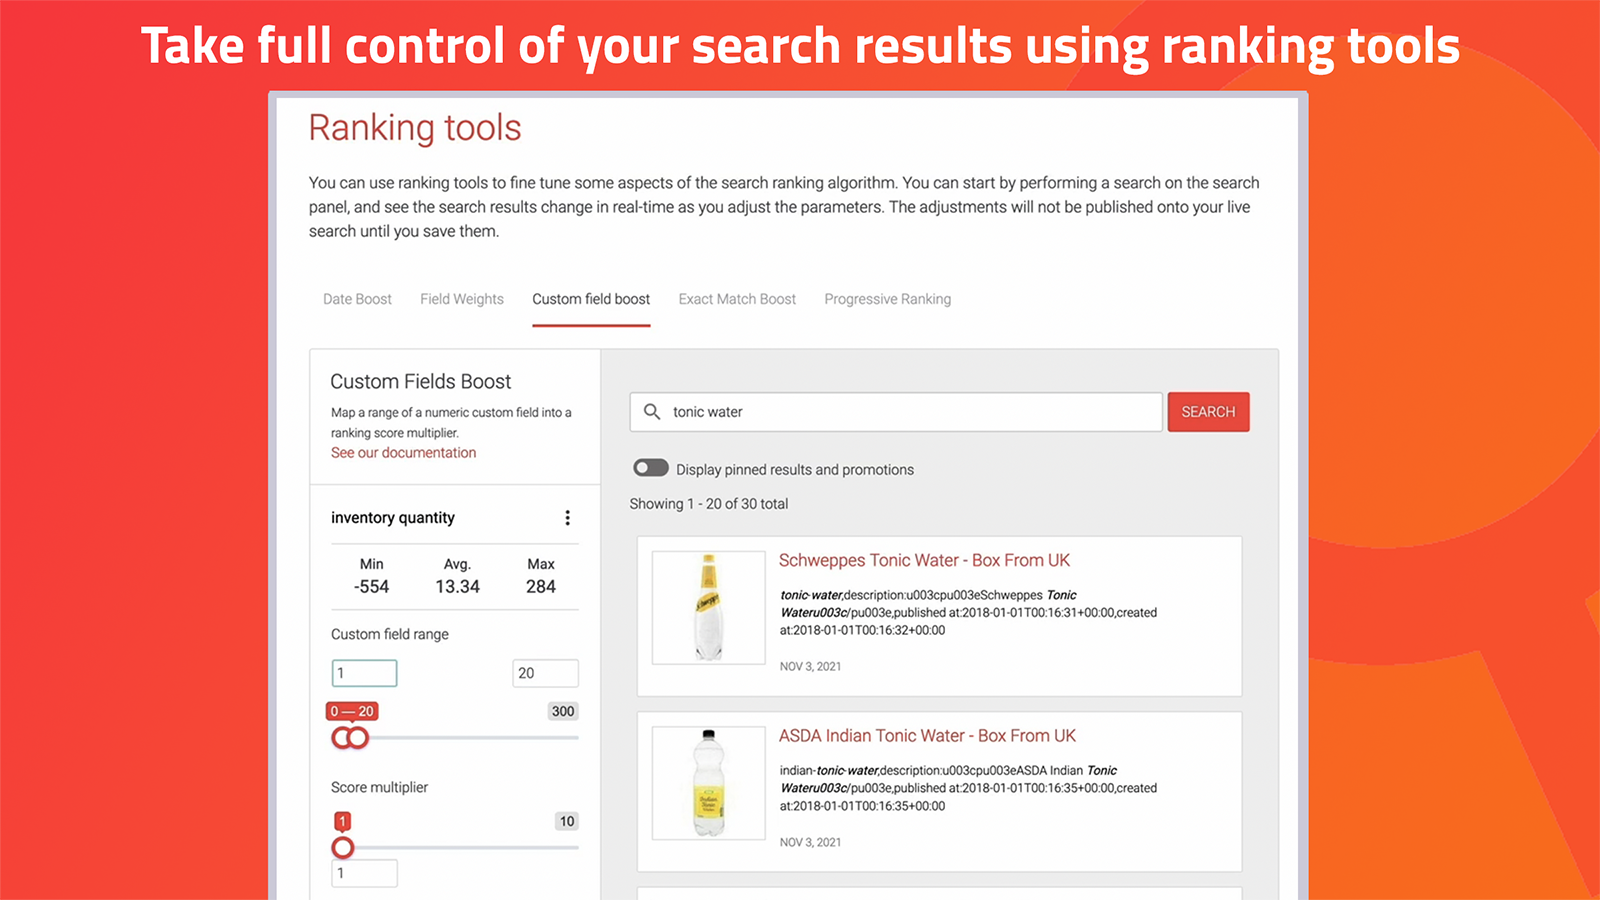 Take full control of your search results using ranking tools